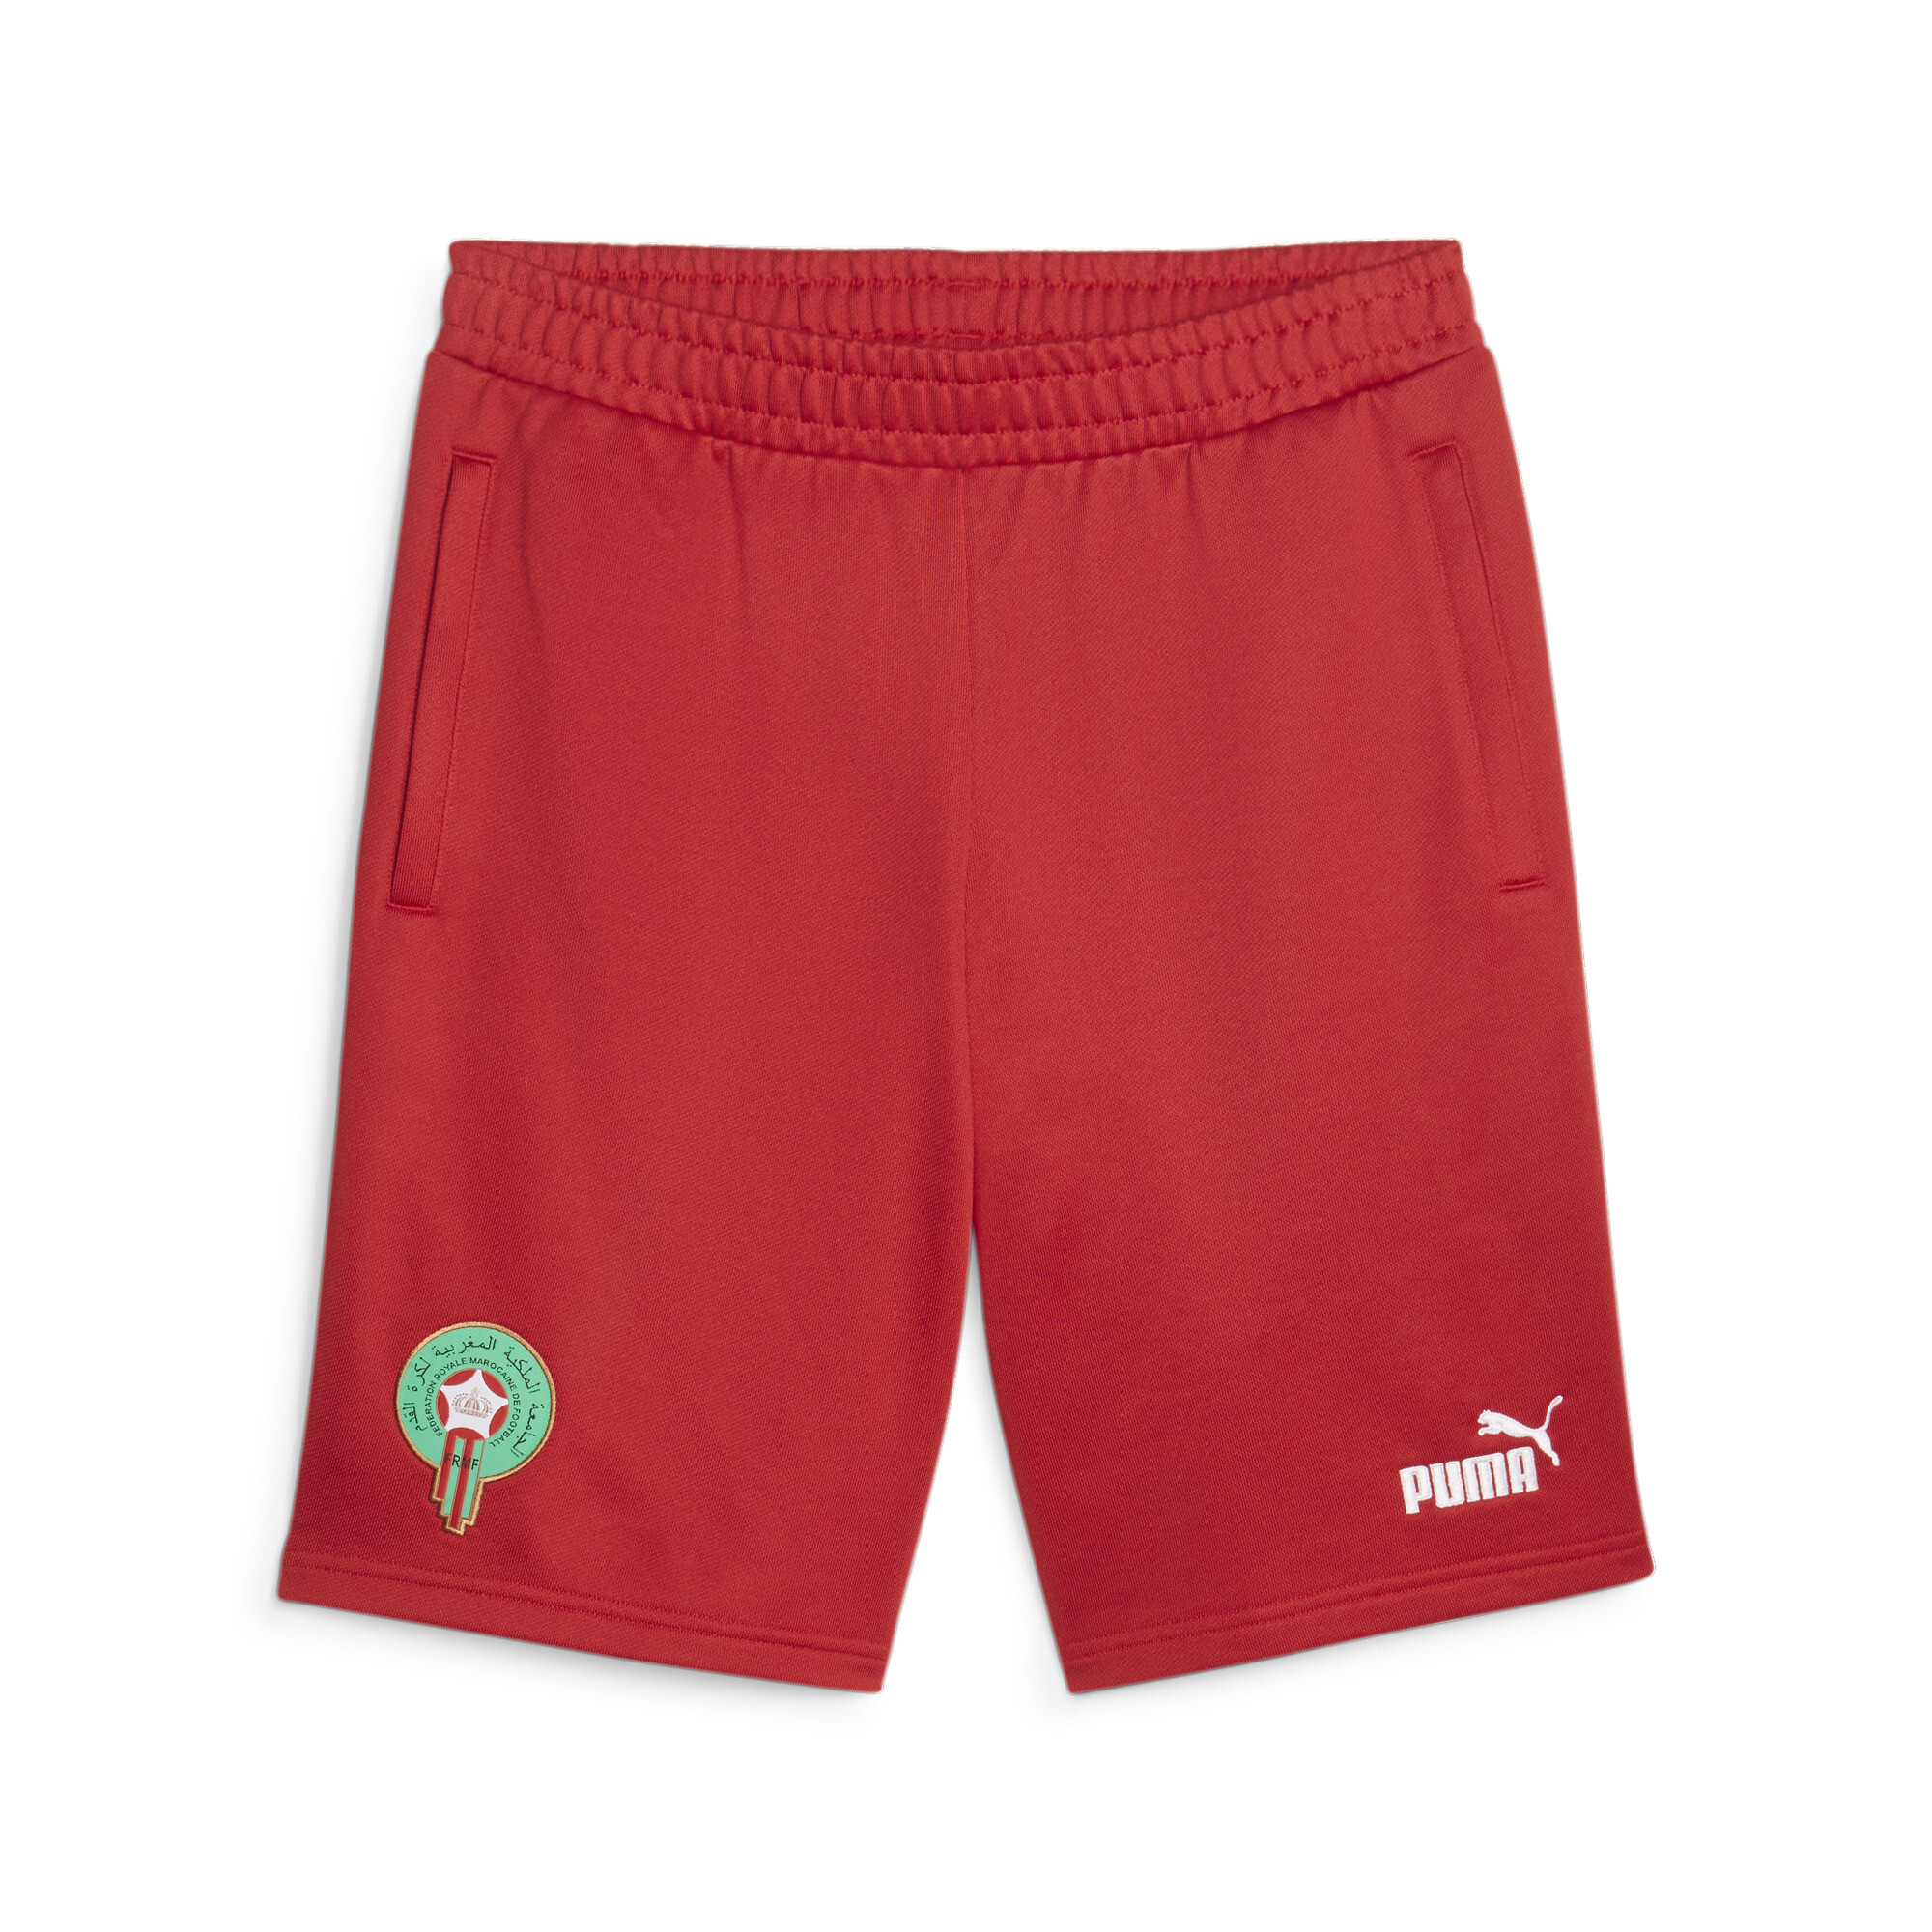 Men's Puma Morocco Ftbl Culture Shorts, Red, Size S, Clothing